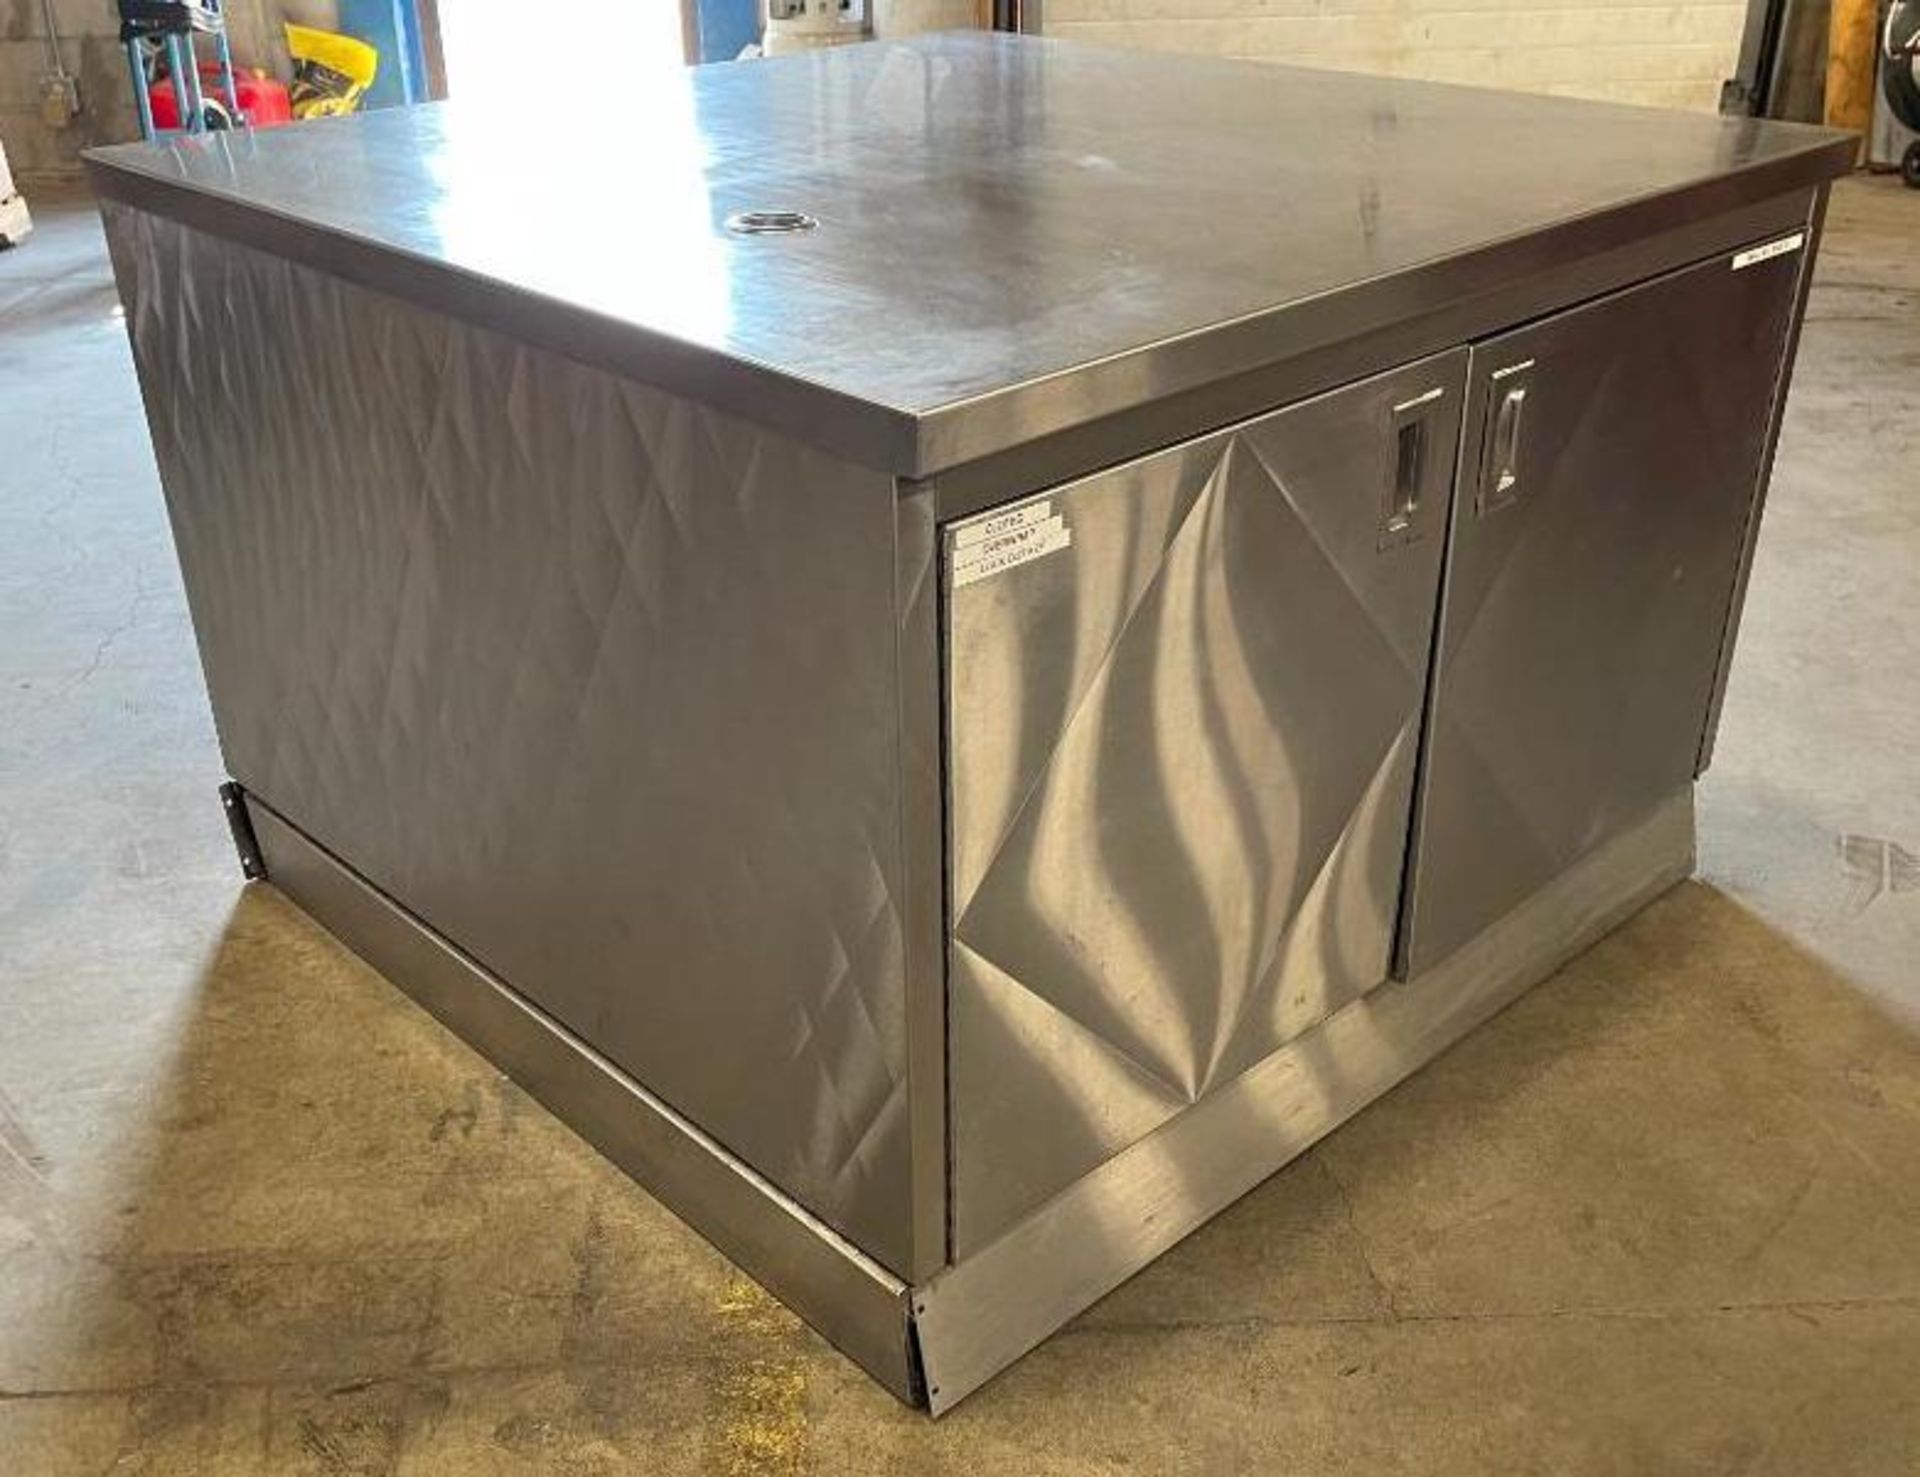 48" FOUR DOOR STAINLESS STEEL STORAGE CABINET/EQUIPMENT STAND - Image 10 of 24